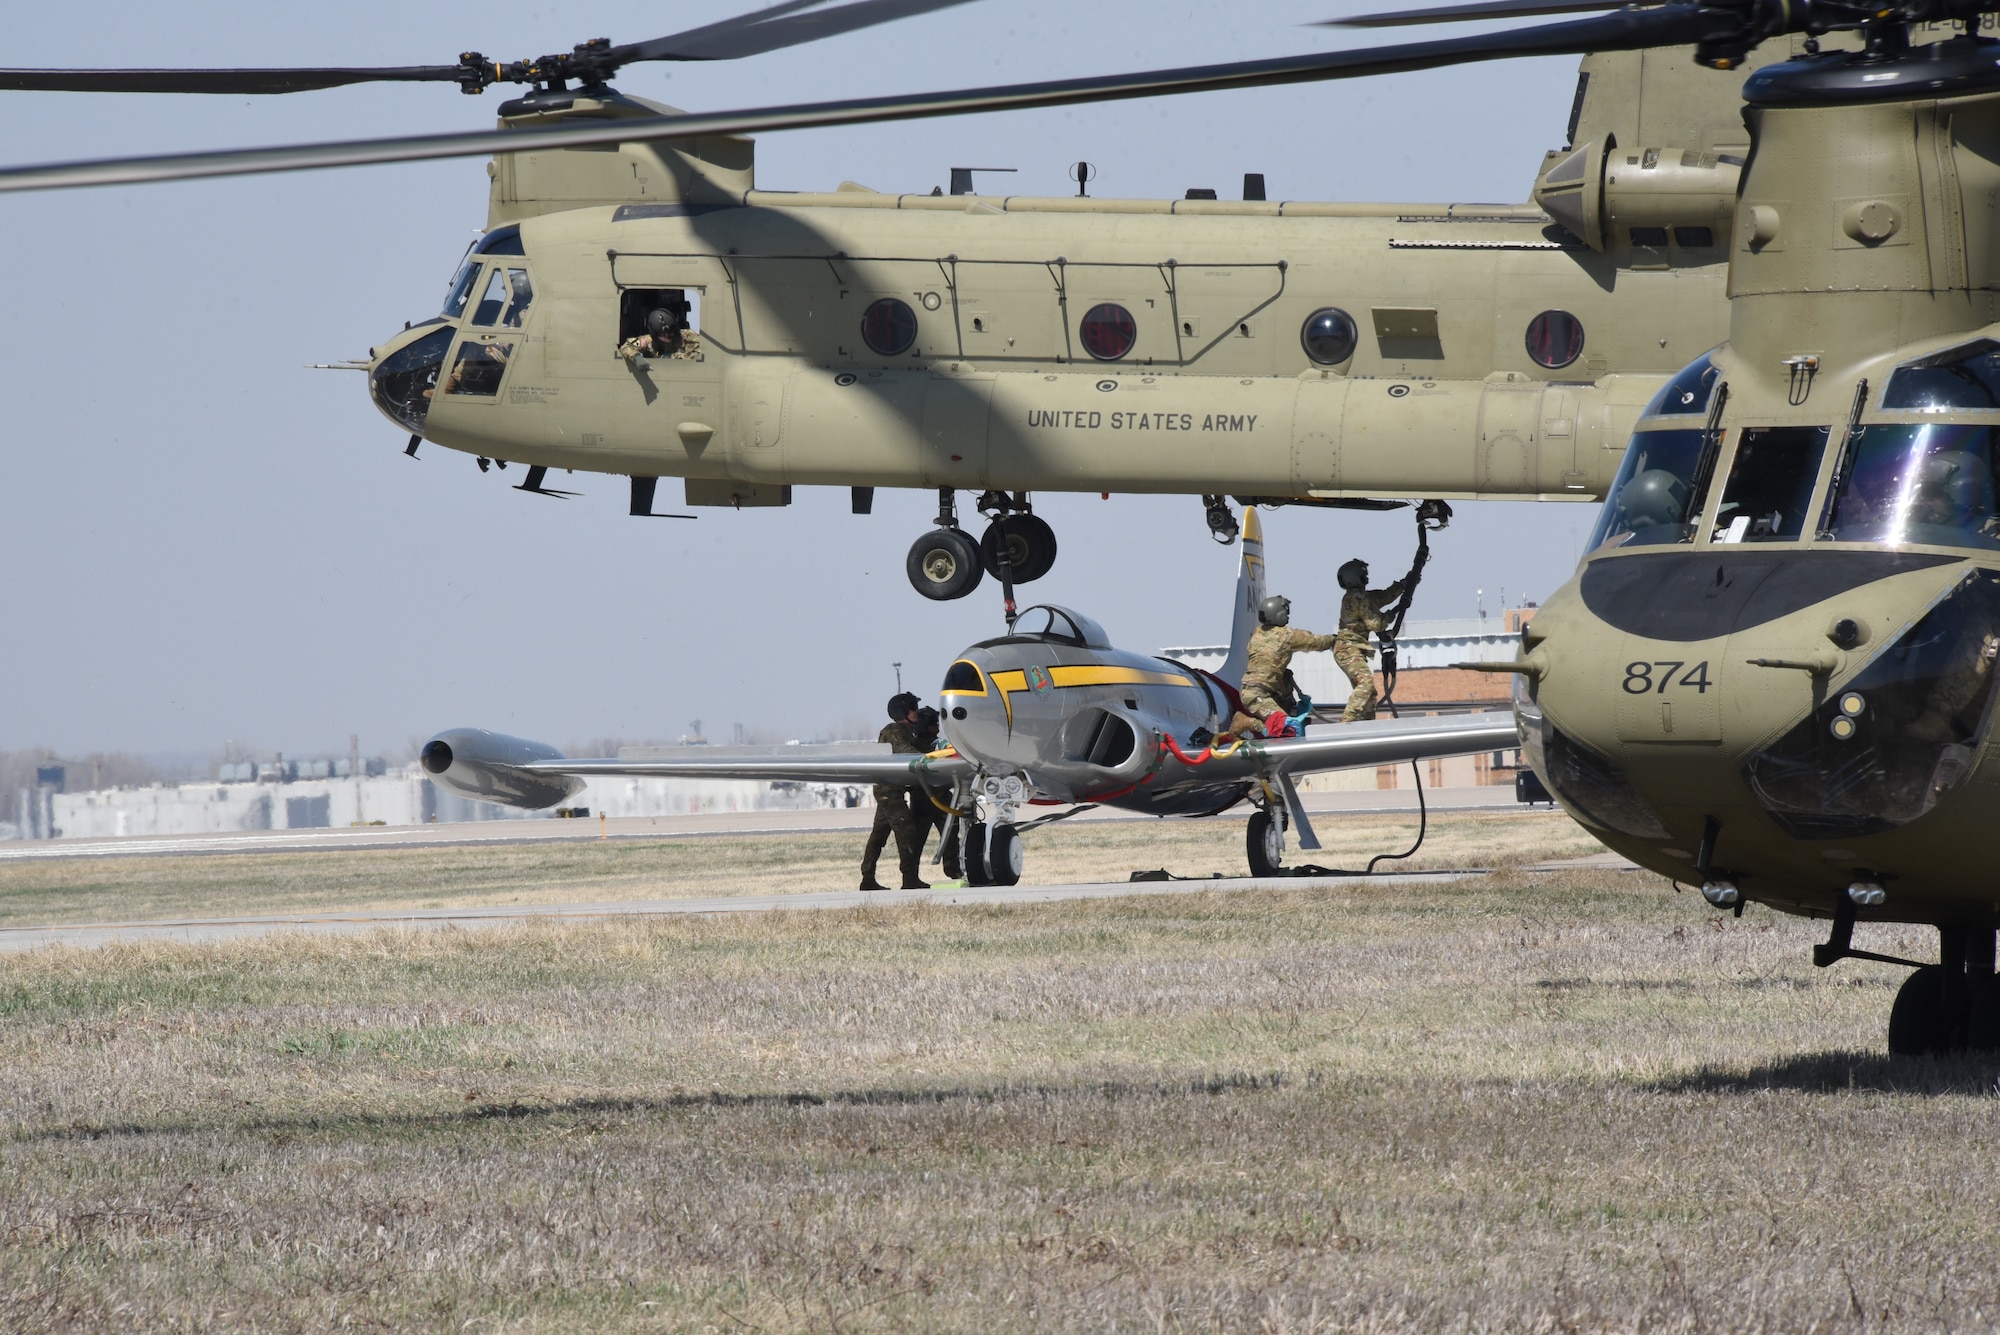 Iowa Army National Guard CH-47 Chinook helicopter picks up a F-80 fighter jet at the Air National Guard paint facility